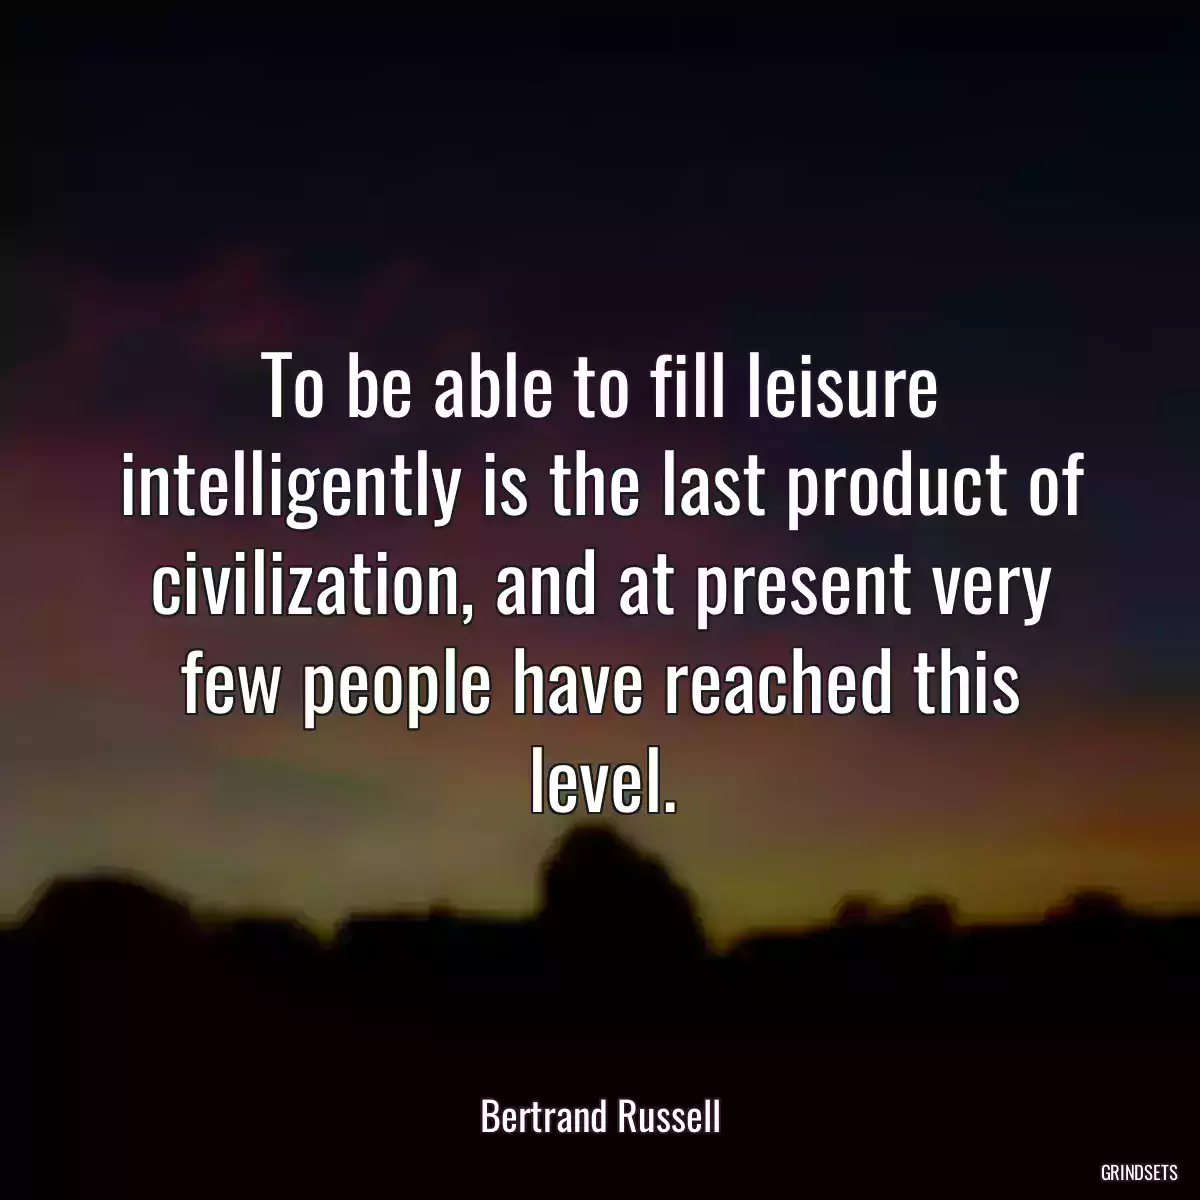 To be able to fill leisure intelligently is the last product of civilization, and at present very few people have reached this level.